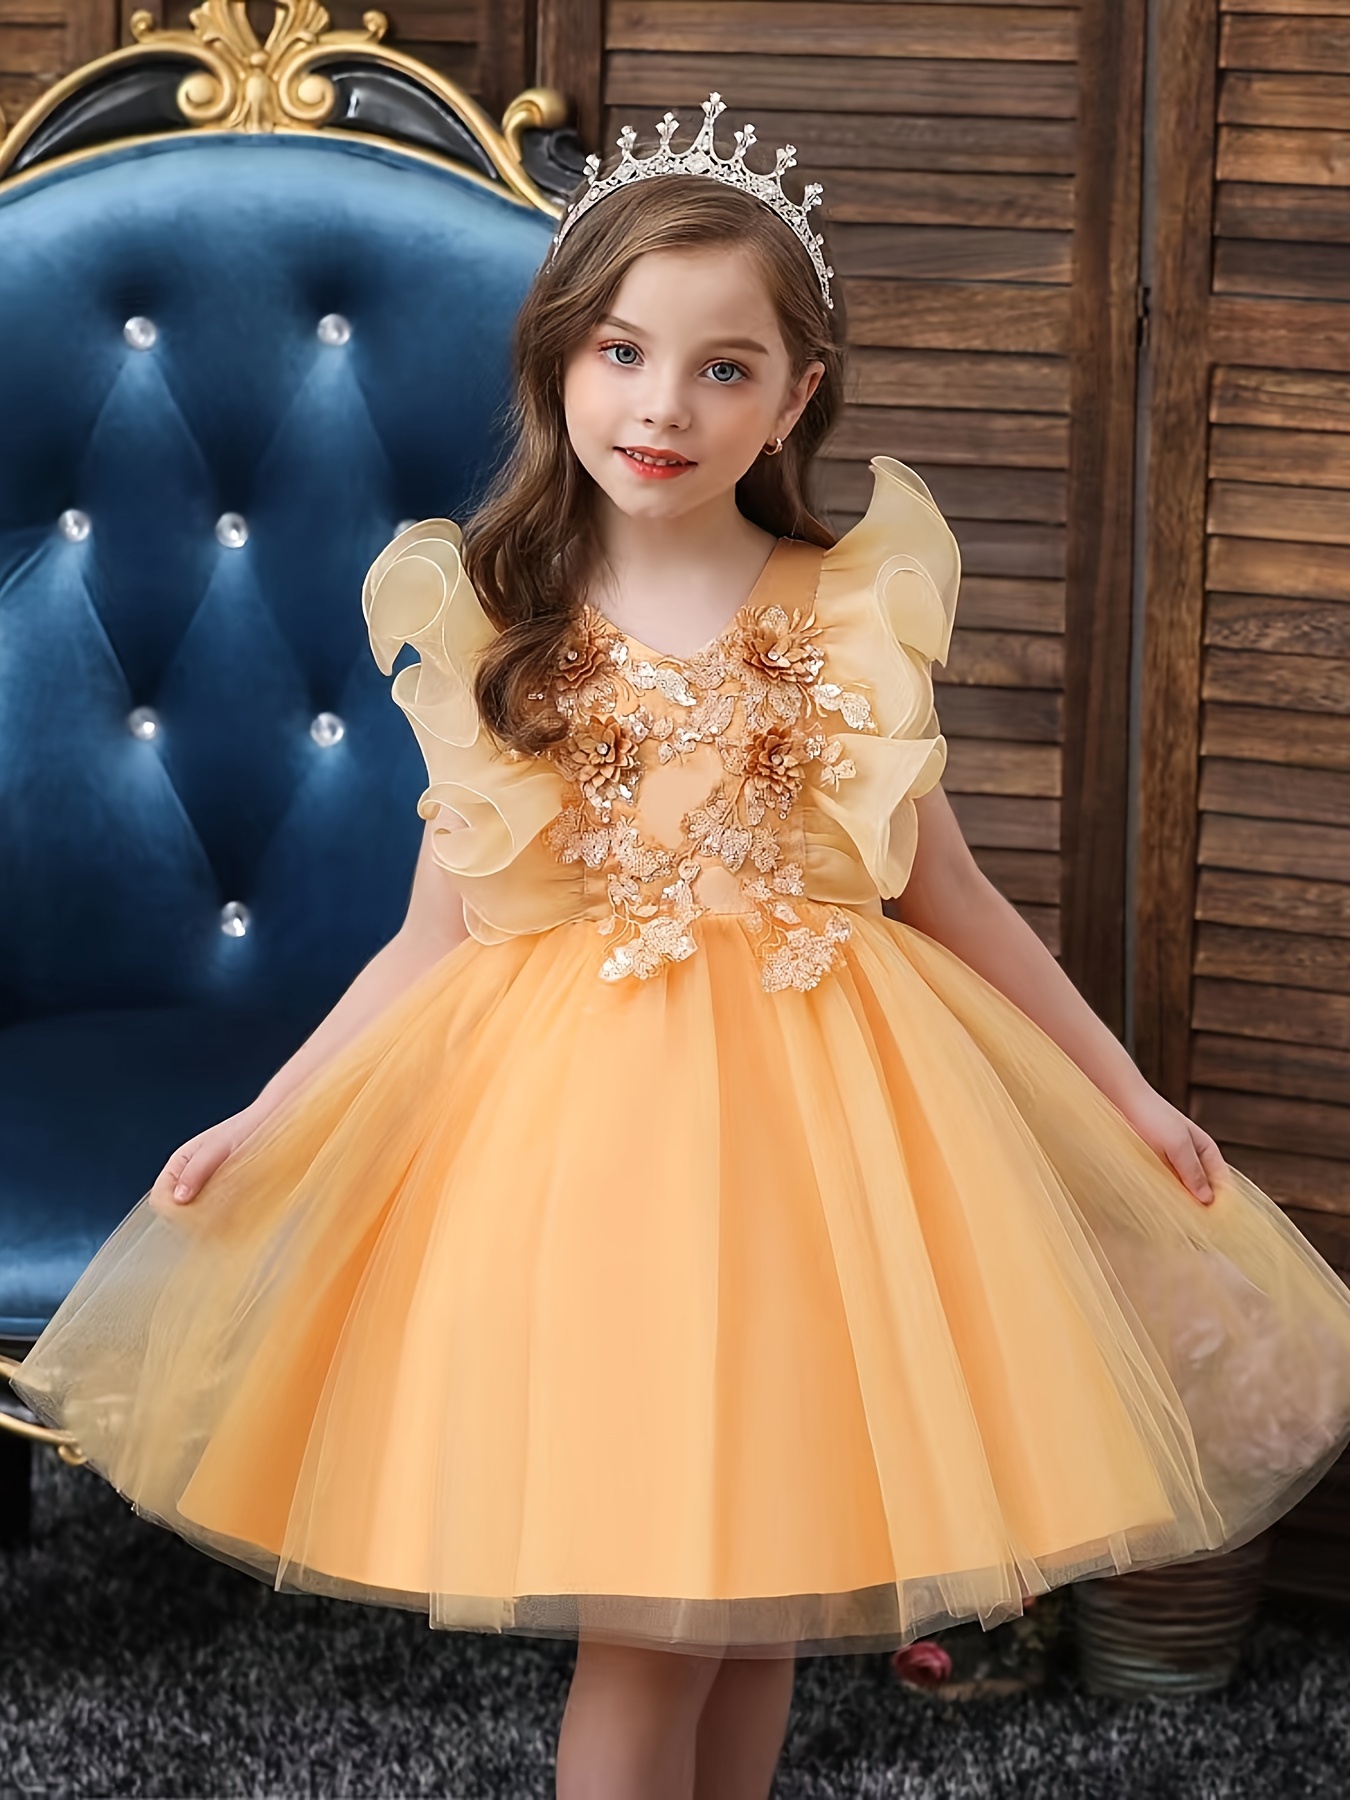 Light Up Princess Dress Snow Queen Cosplay Christmas Halloween Costume For  Girls Party Evening Prom Blue Dress For 3-9 Years Old